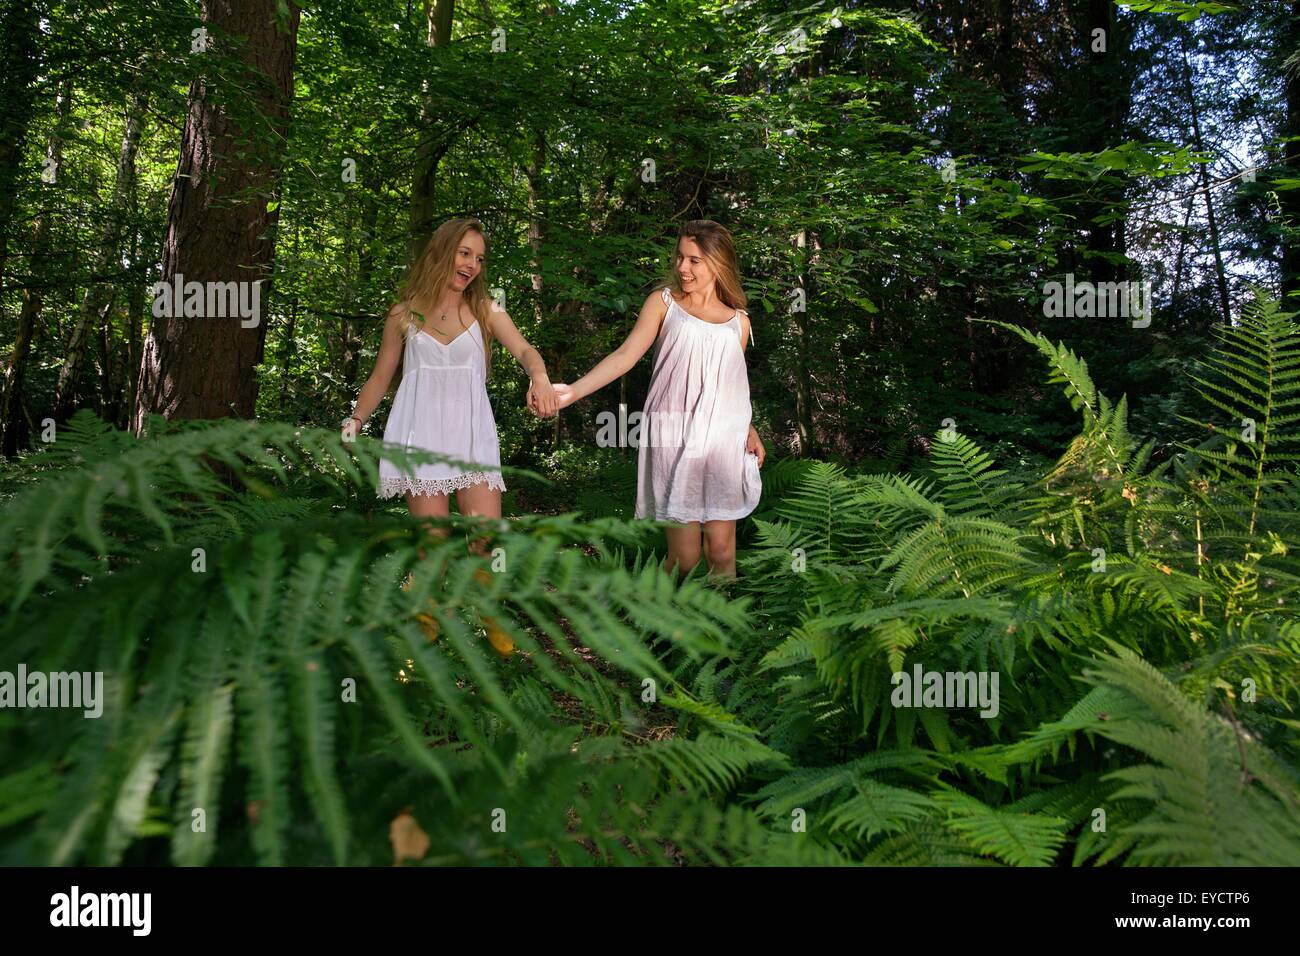 Two teenage girls walking through forest, hand in hand Stock Photo